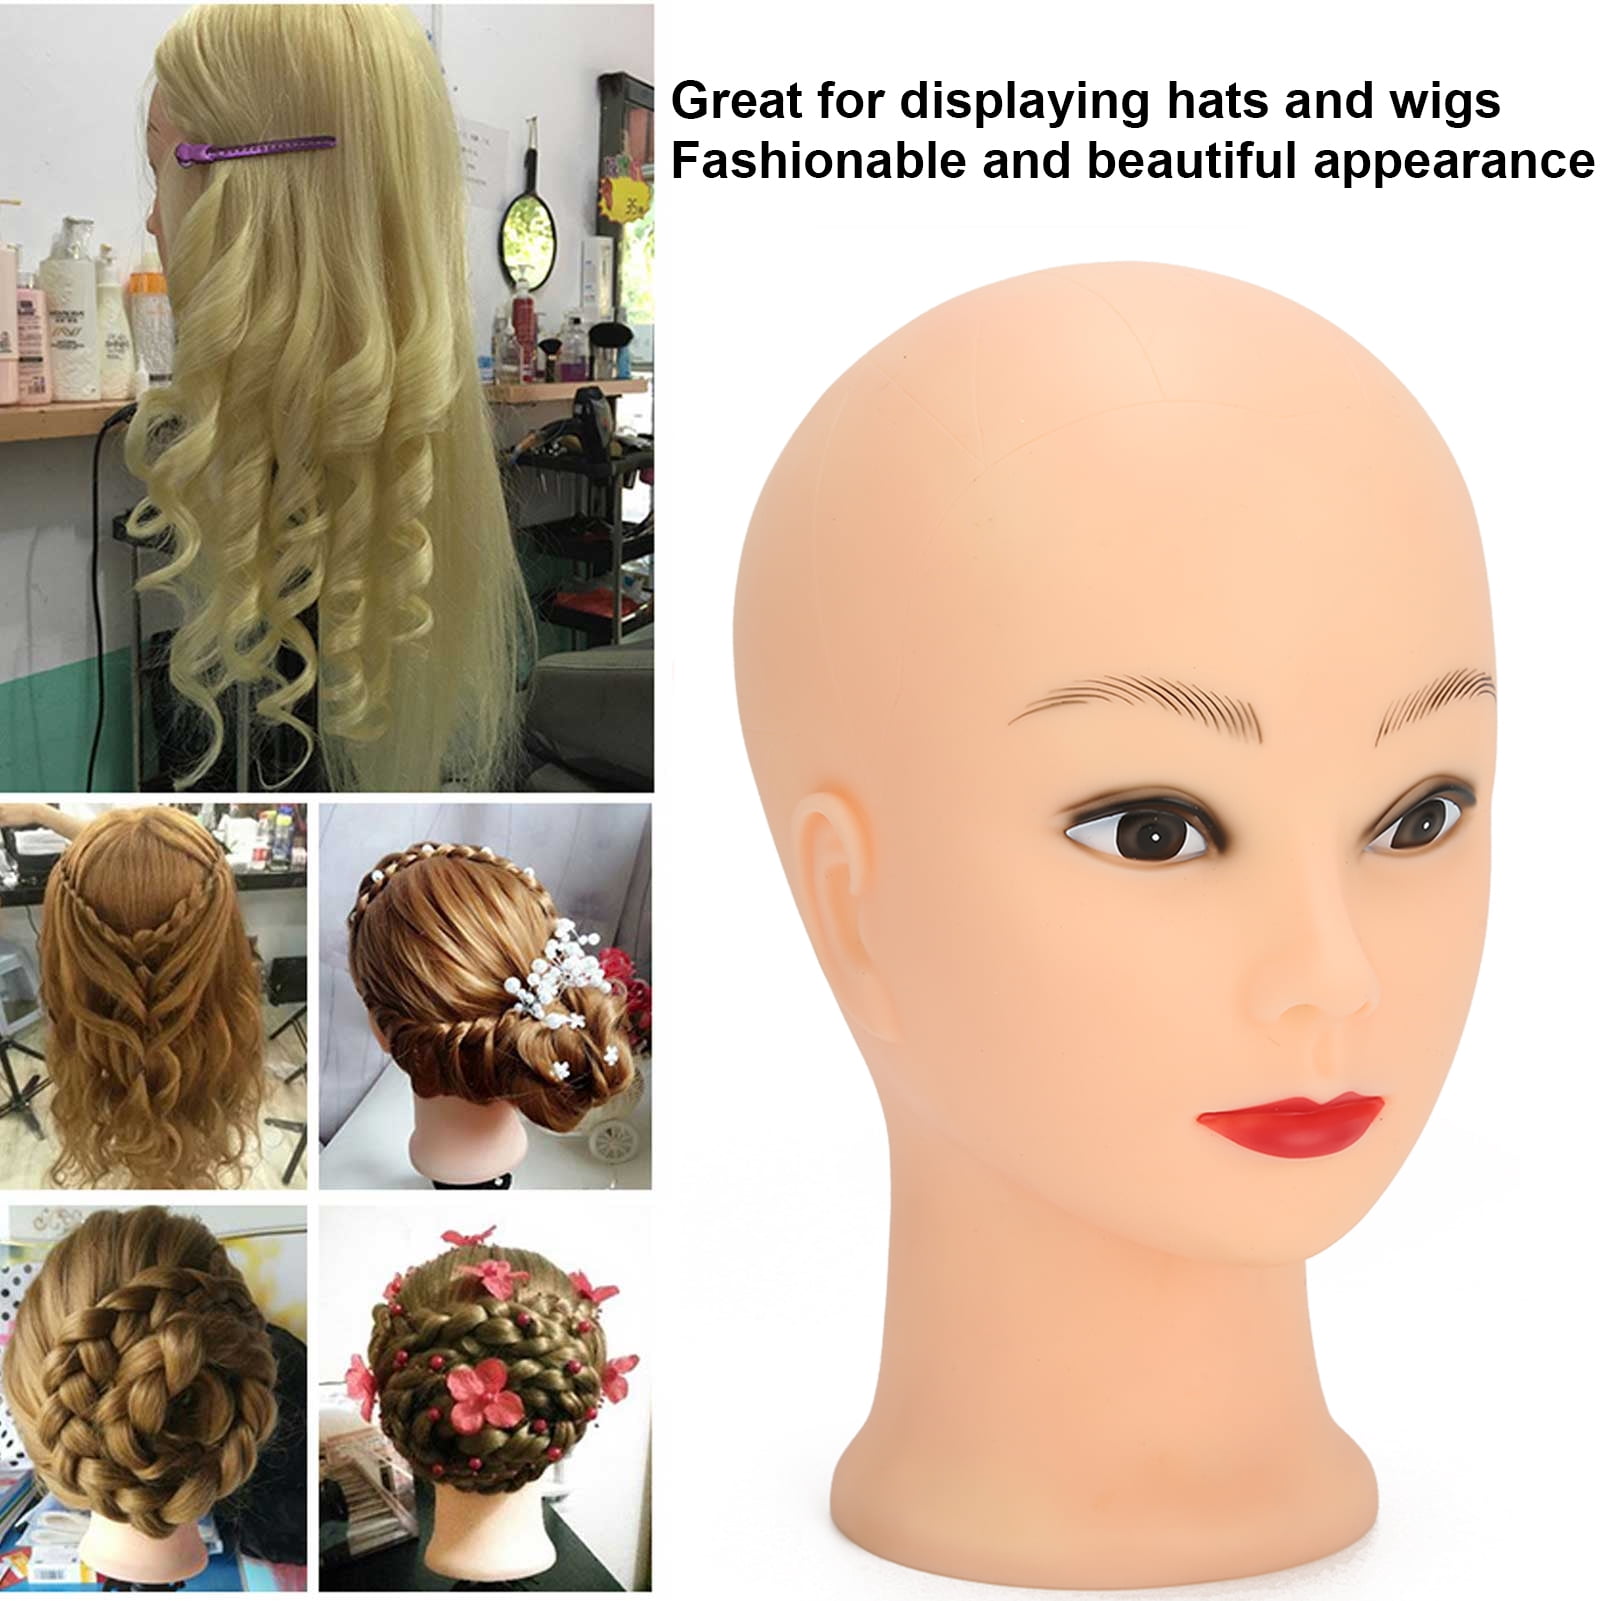 Female Bald Mannequin Doll Head for Wig Making, Hats, Eyeglasses,  Displaying 